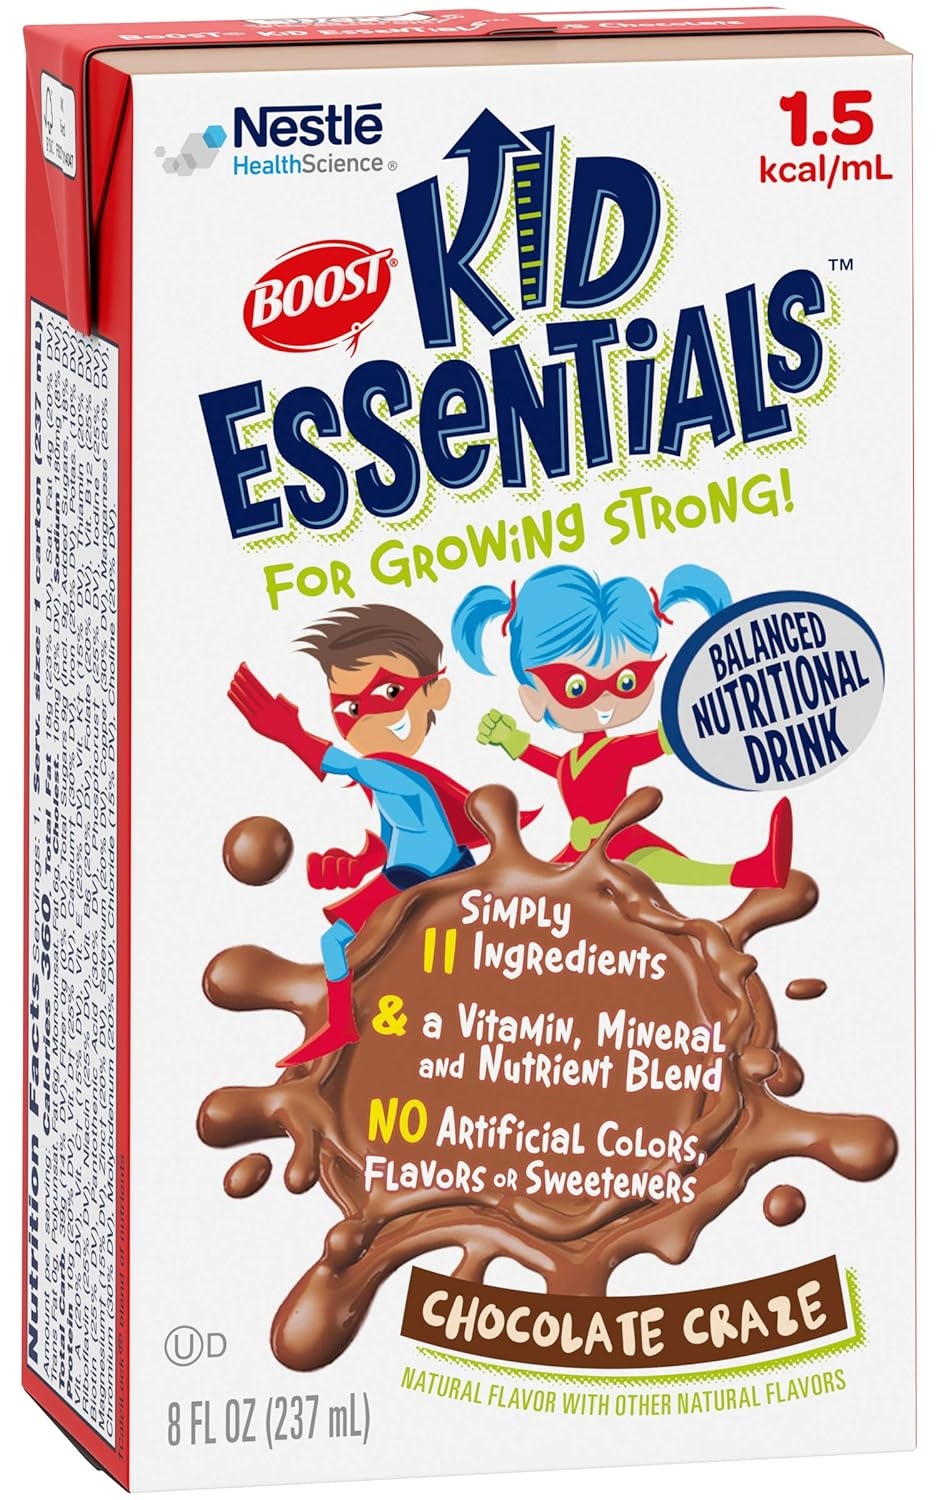 Boost Kid Essentials 1.5 Balanced Nutritional Drink, Chocolate Craze - Vitamin, Mineral and Nutrient Blend - 8 FL OZ (Pack of 3)